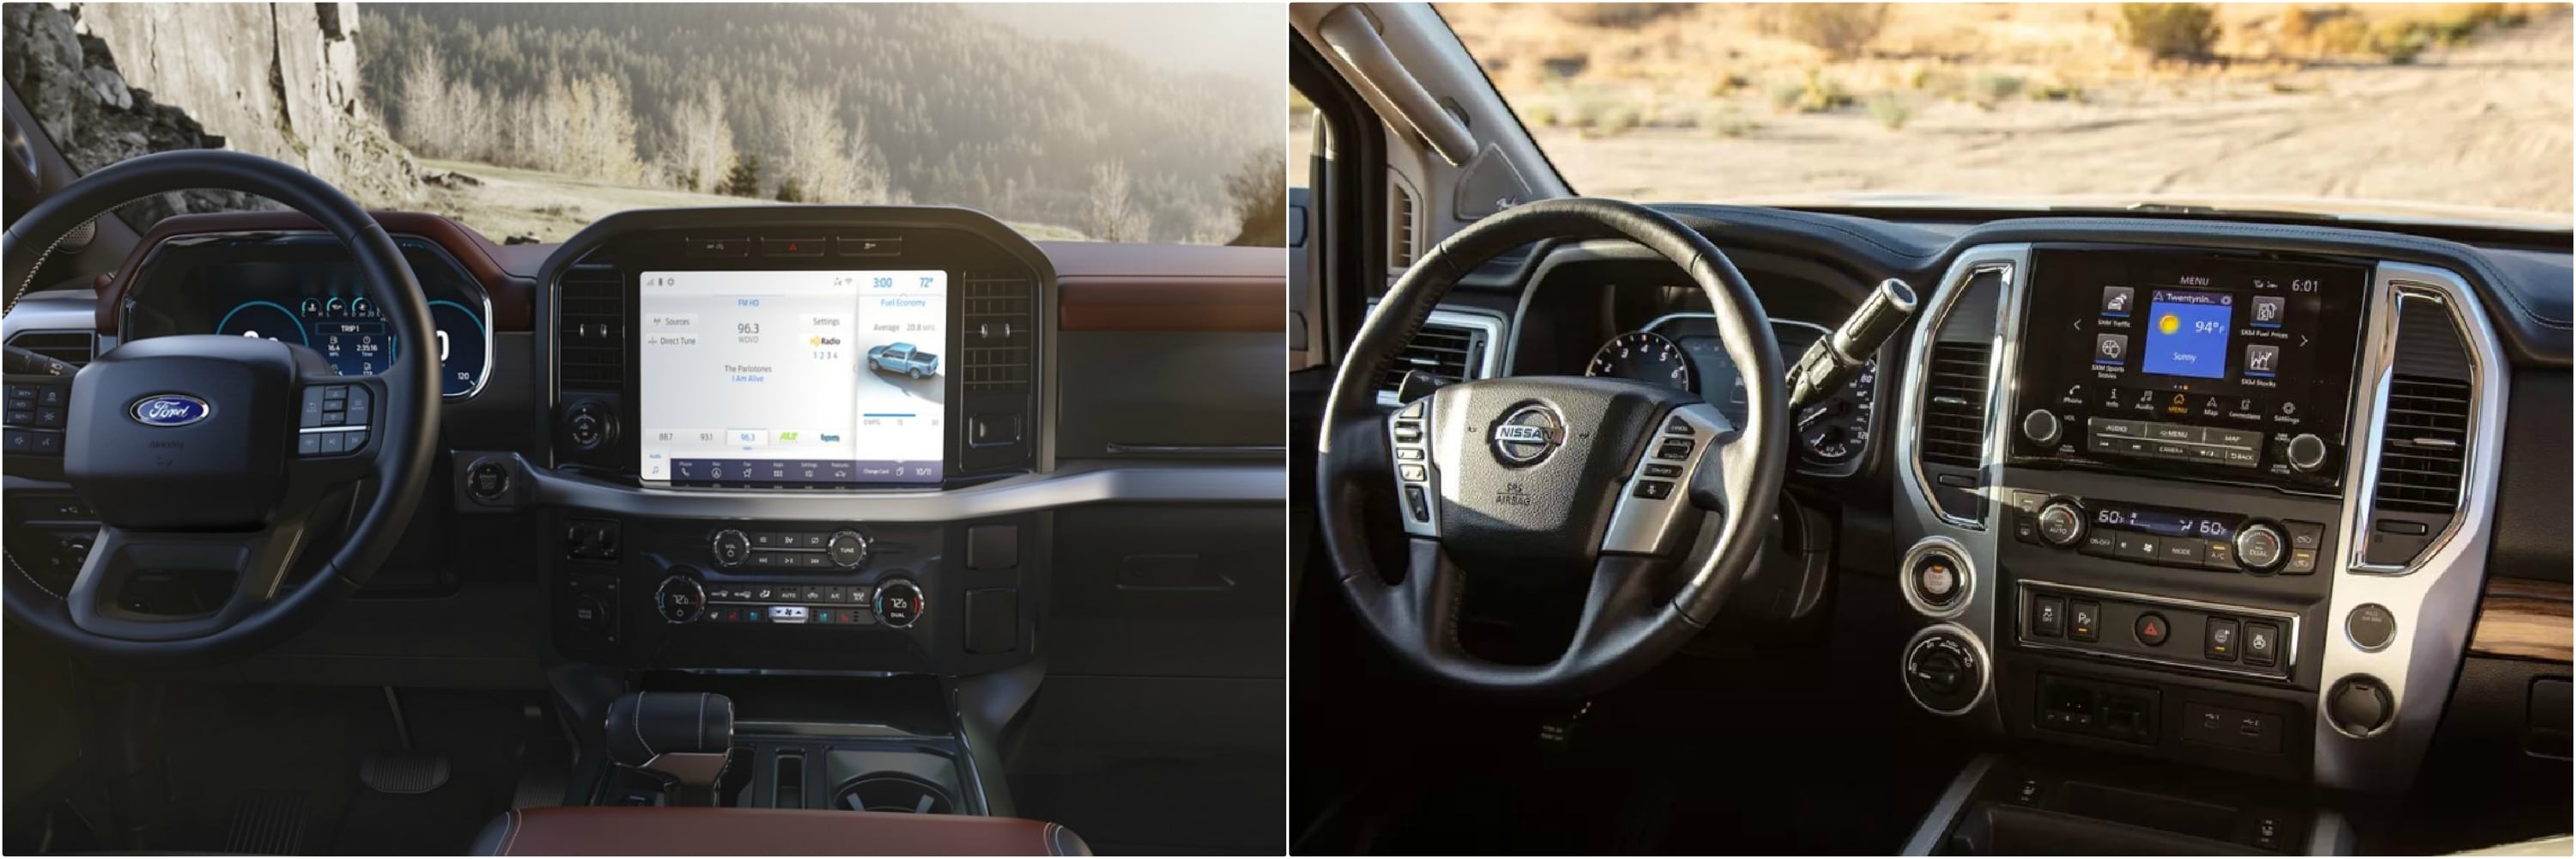 A glimpse of the interior dashboard of a new 2021 Ford F-150 next to the new Nissan Titan